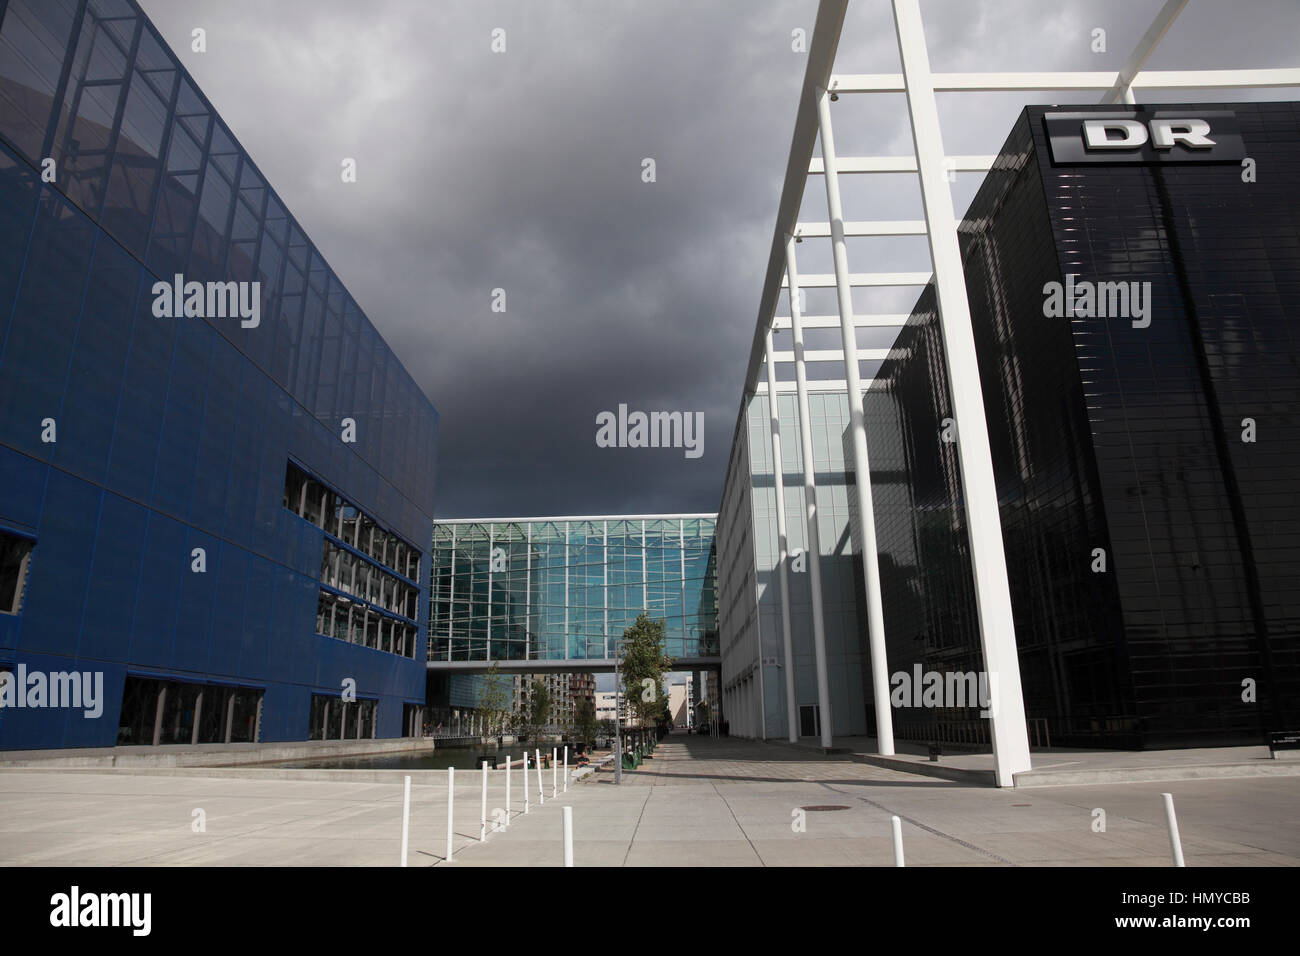 The DR (Danish Radio) Koncerthuset or concert hall on the left and a DR  building on the right, in Ørestad Copenhagen, Denmark Stock Photo - Alamy